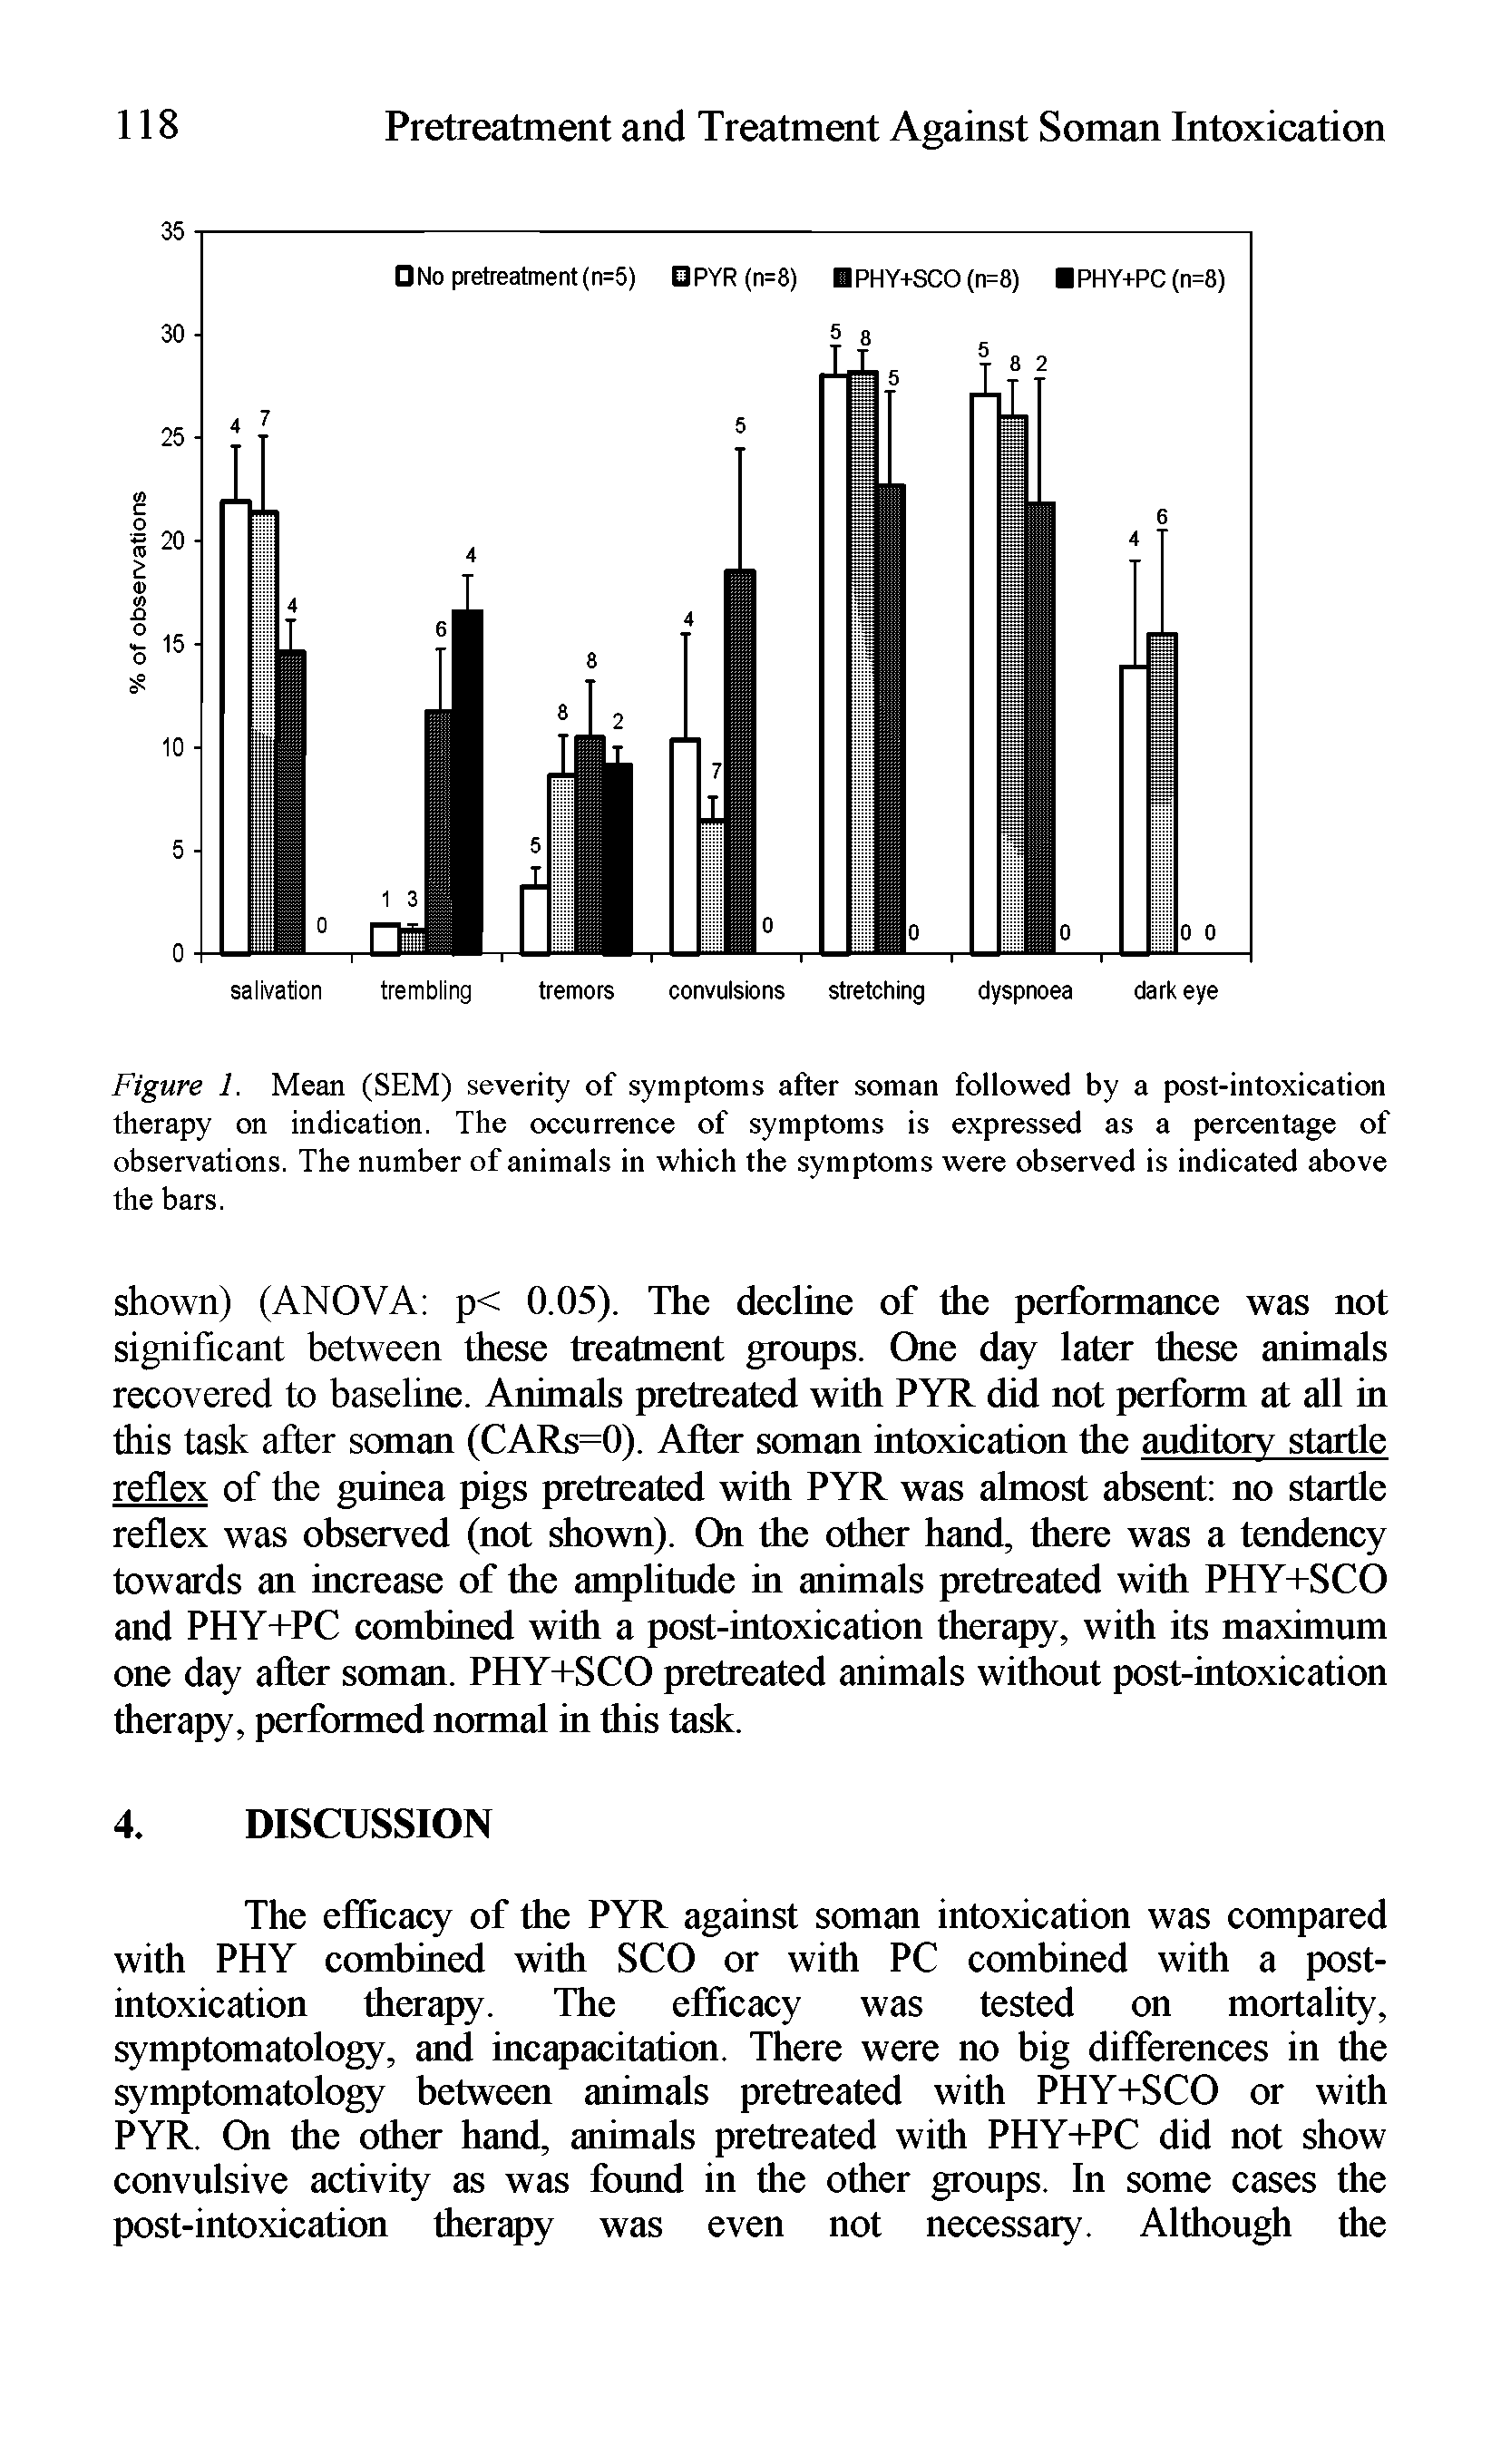 Figure 1. Mean (SEM) severity of symptoms after soman followed by a post-intoxication therapy on indication. The occurrence of symptoms is expressed as a percentage of observations. The number of animals in which the symptoms were observed is indicated above the bars.